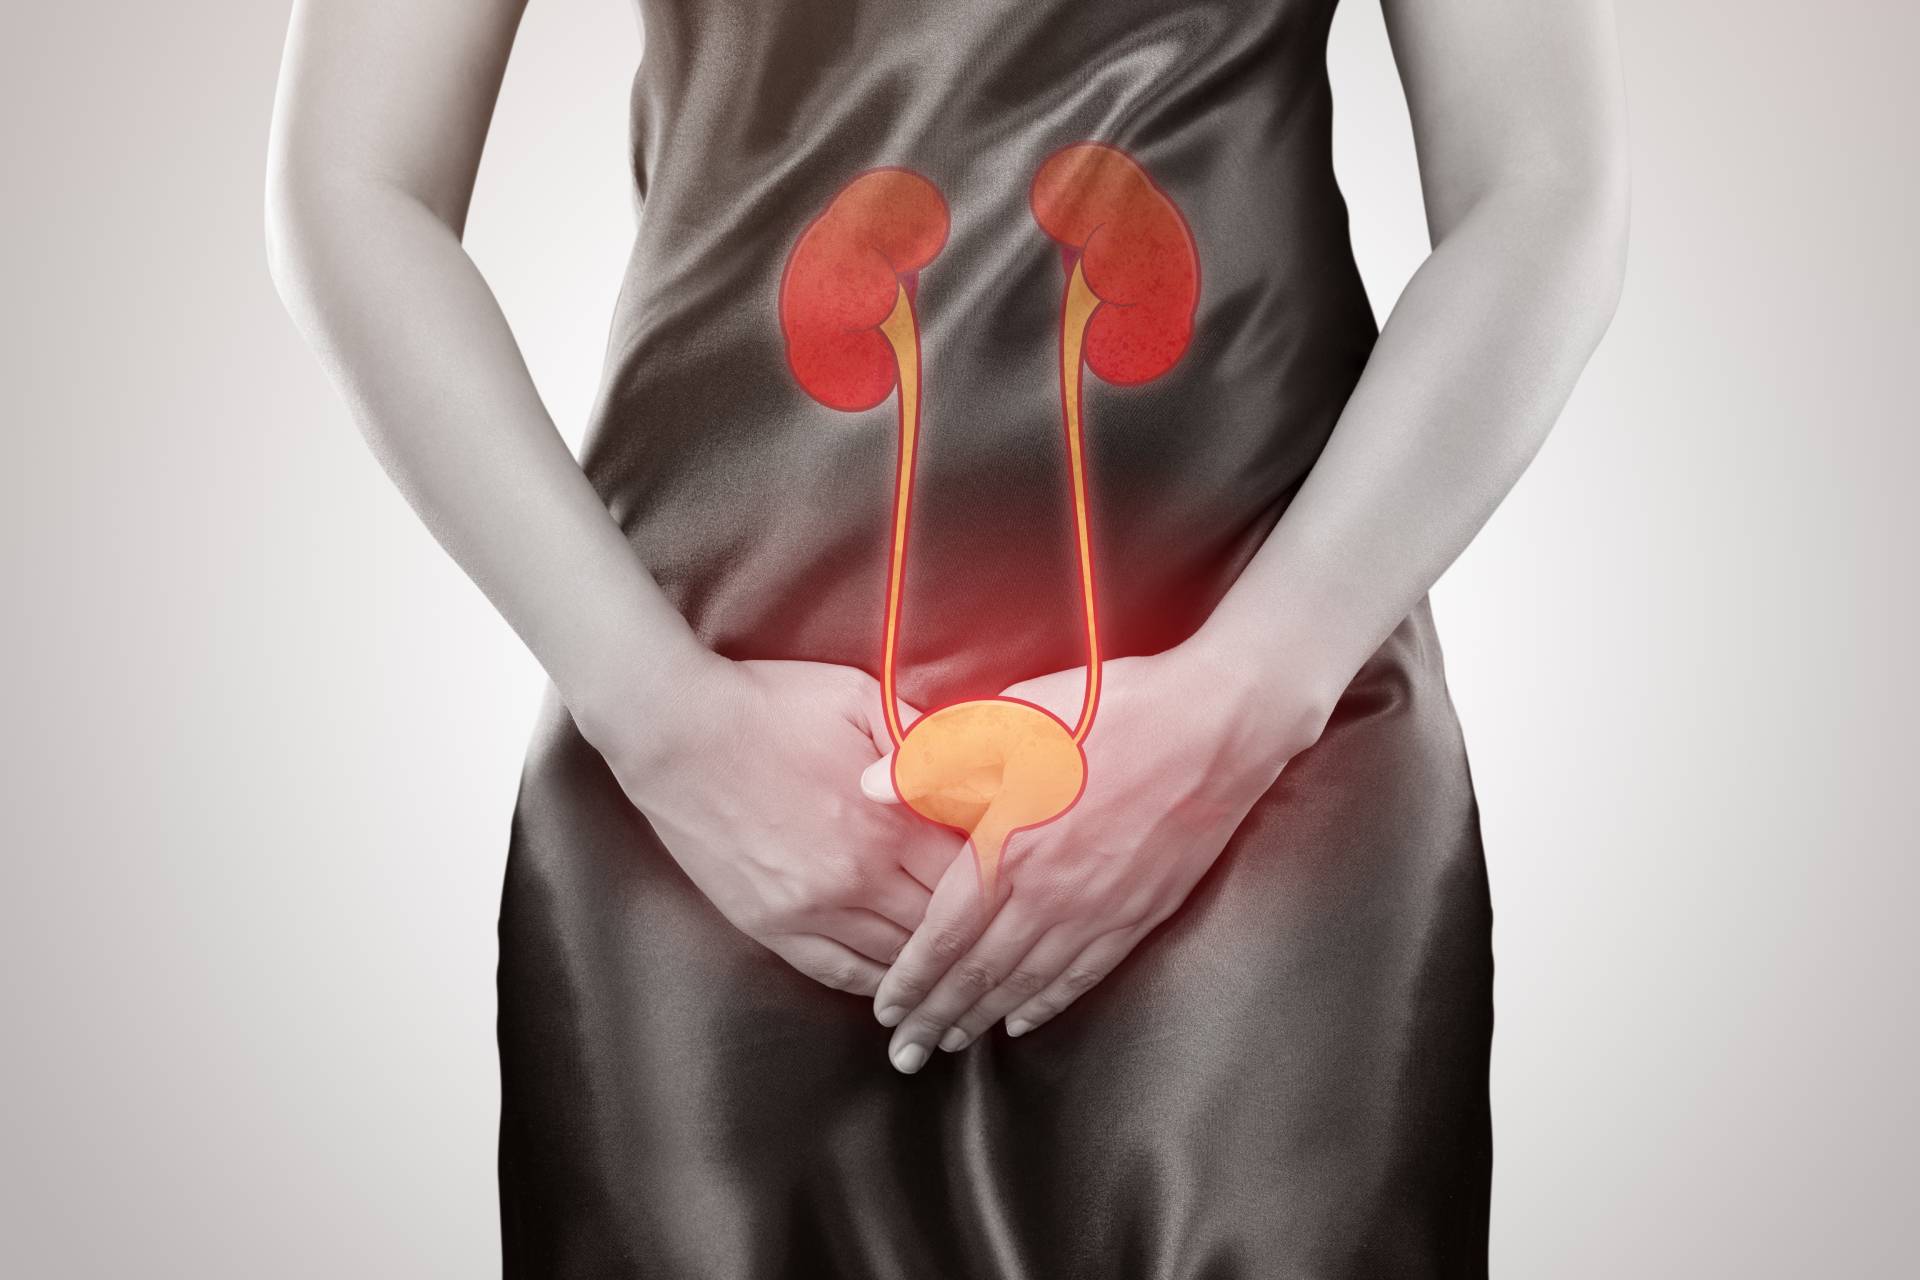 How do I know If I have Urinary Tract Infection (UTI)?